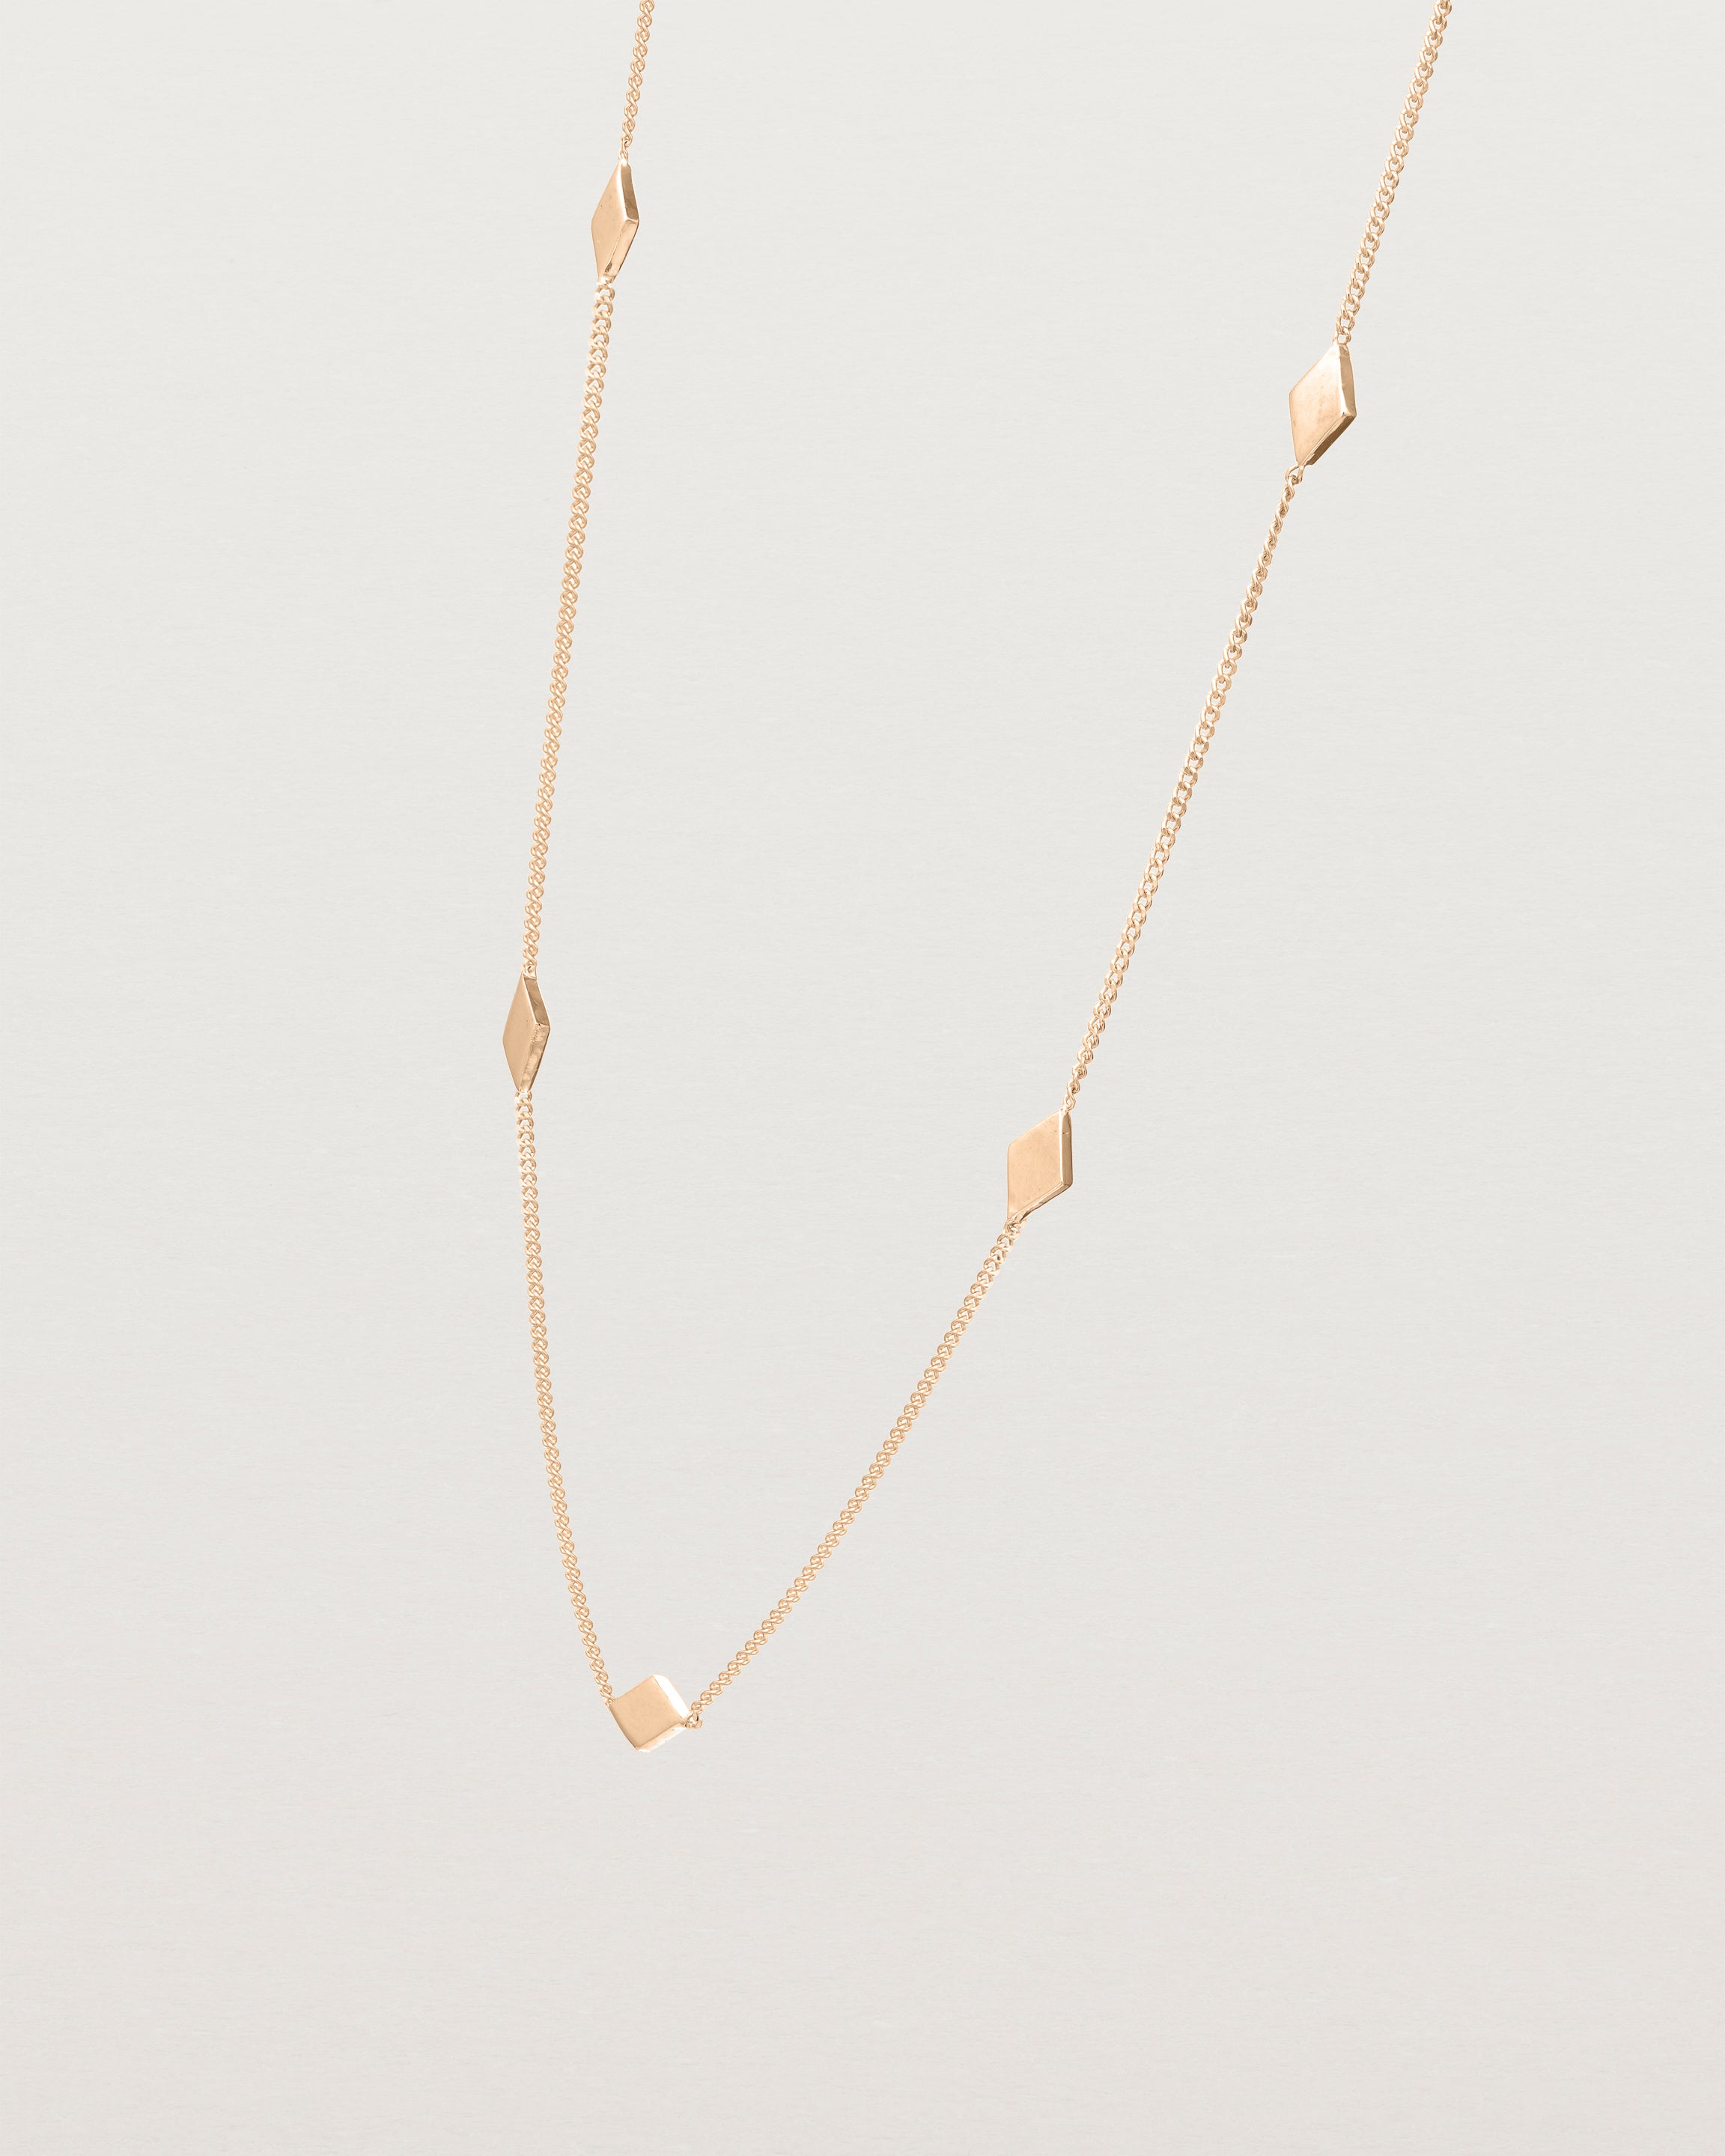 Angled view of the Nuna Charm Necklace in rose gold.